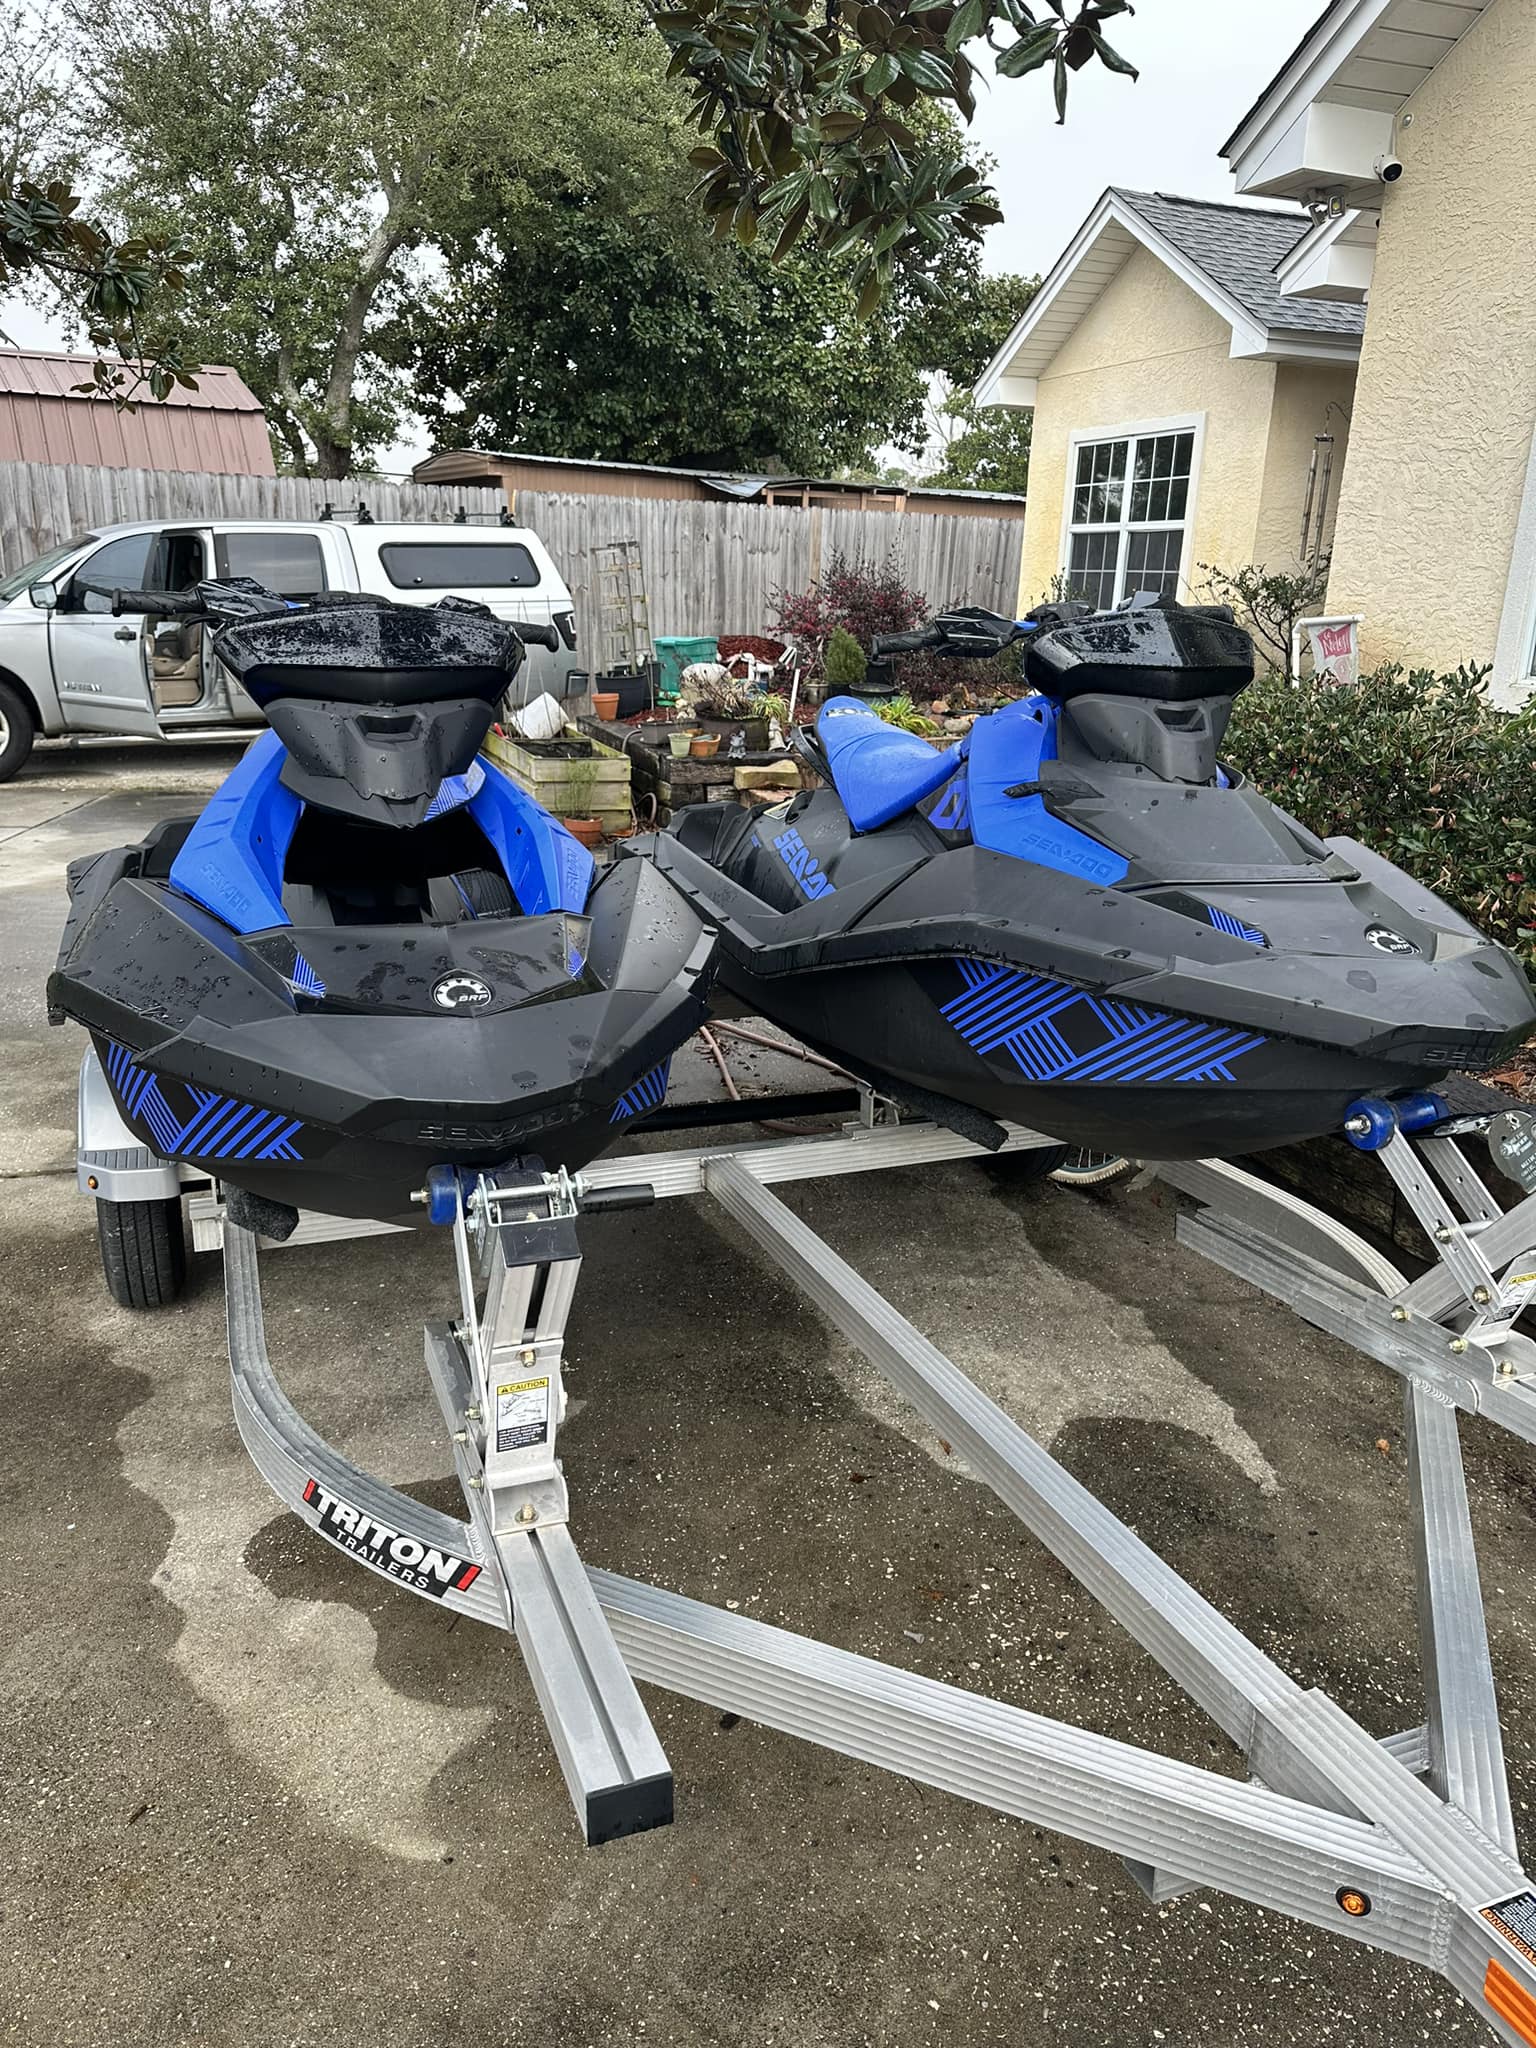 2022 Yamaha Spark Trixx 2-UP PWC for sale in P C Beach, FL - image 1 